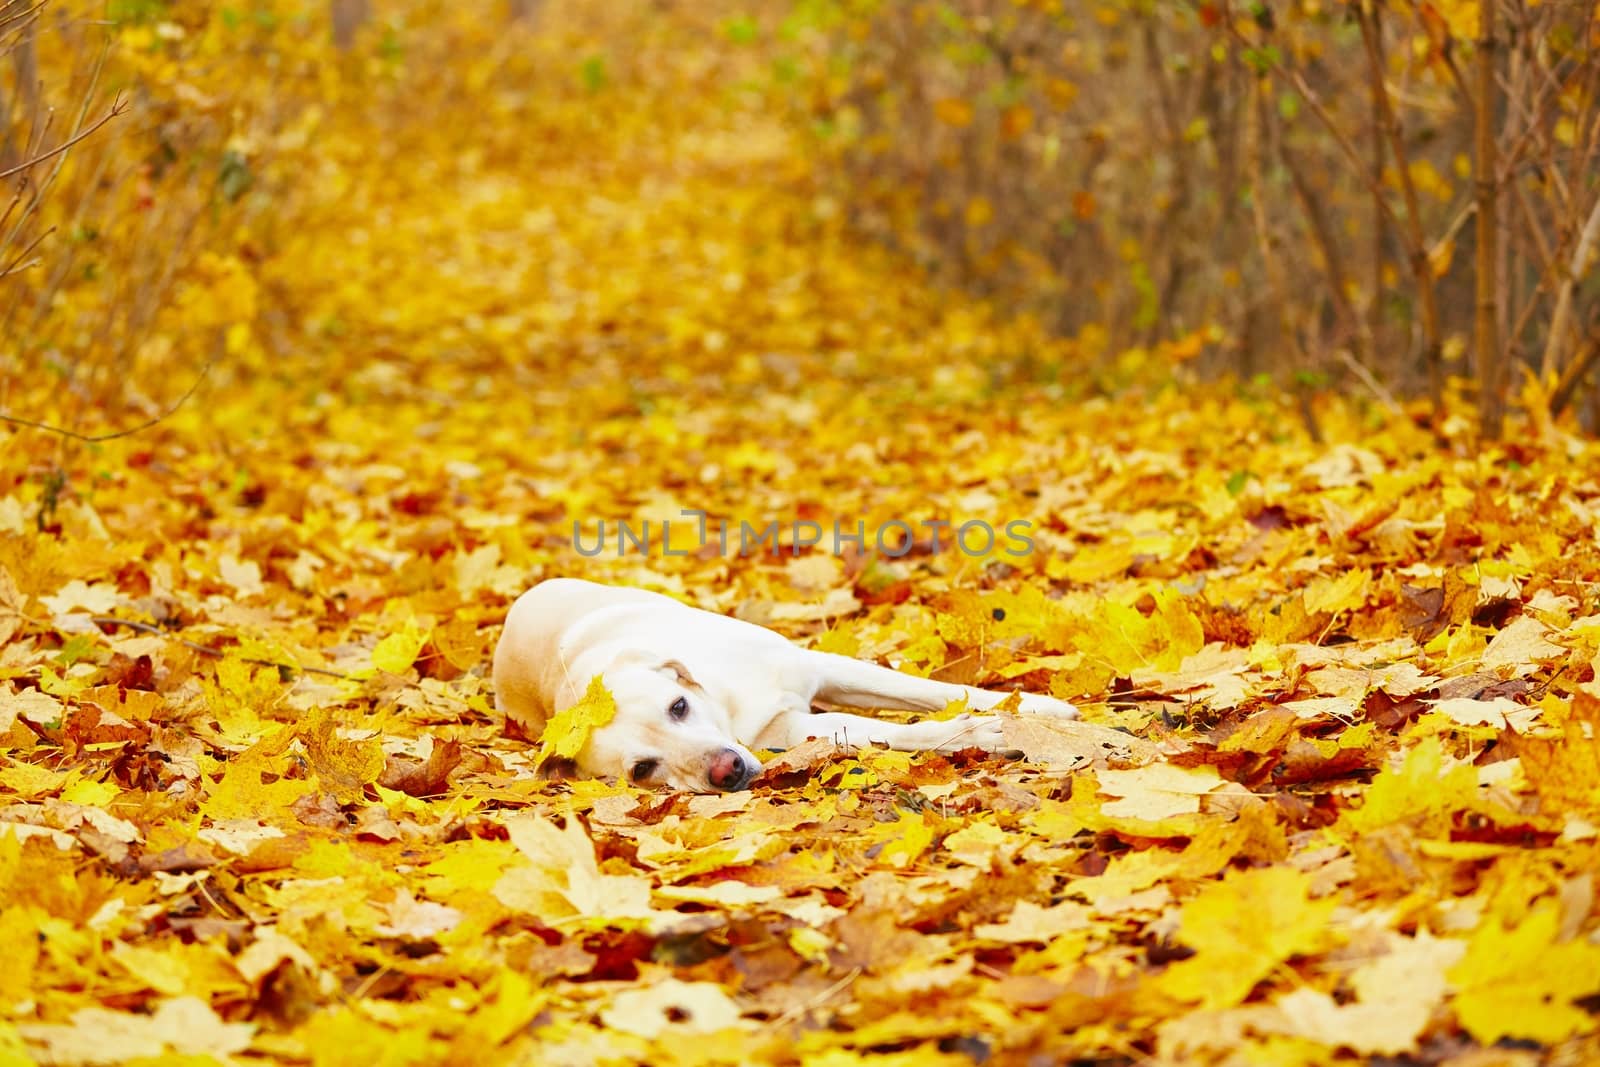 Labrador retriever is playing in the leaves in autumn 